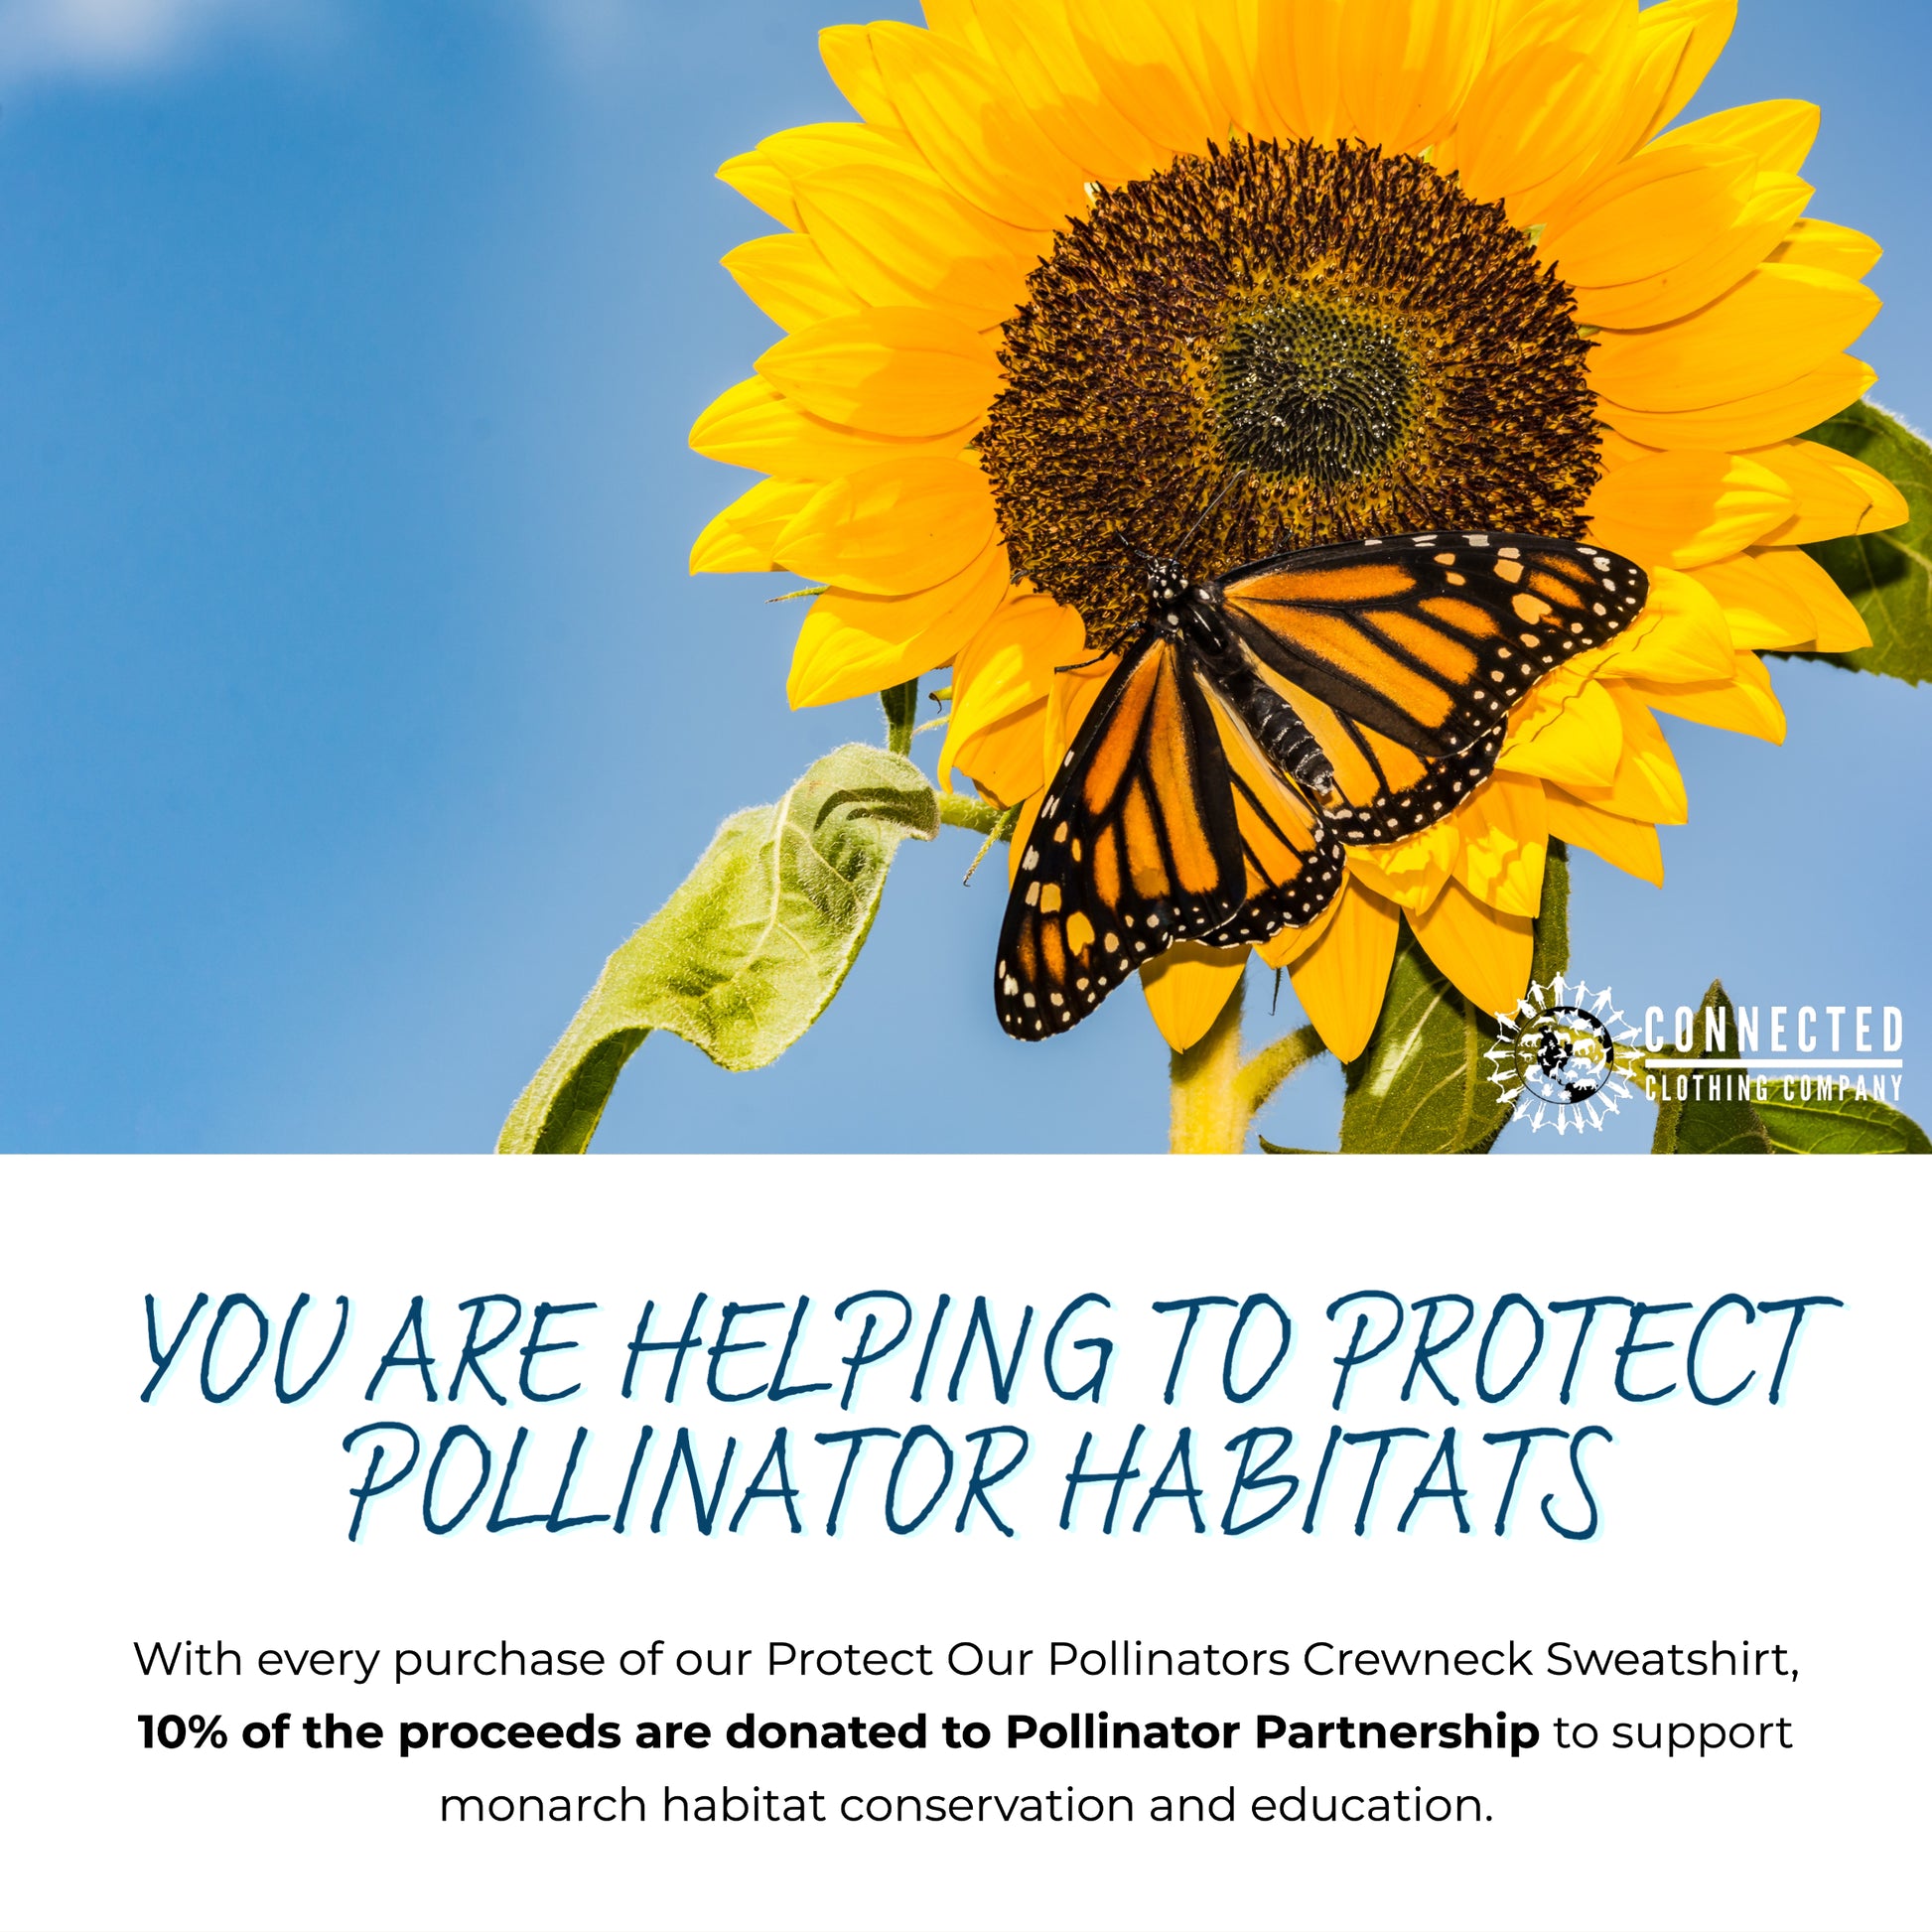 You are helping to protect pollinator habitats. With every purchase of our Protect Our Pollinators Crewneck Sweatshirt, 10% of the proceeds are donated to Pollinator Partnership to support monarch habitat conservation and education.